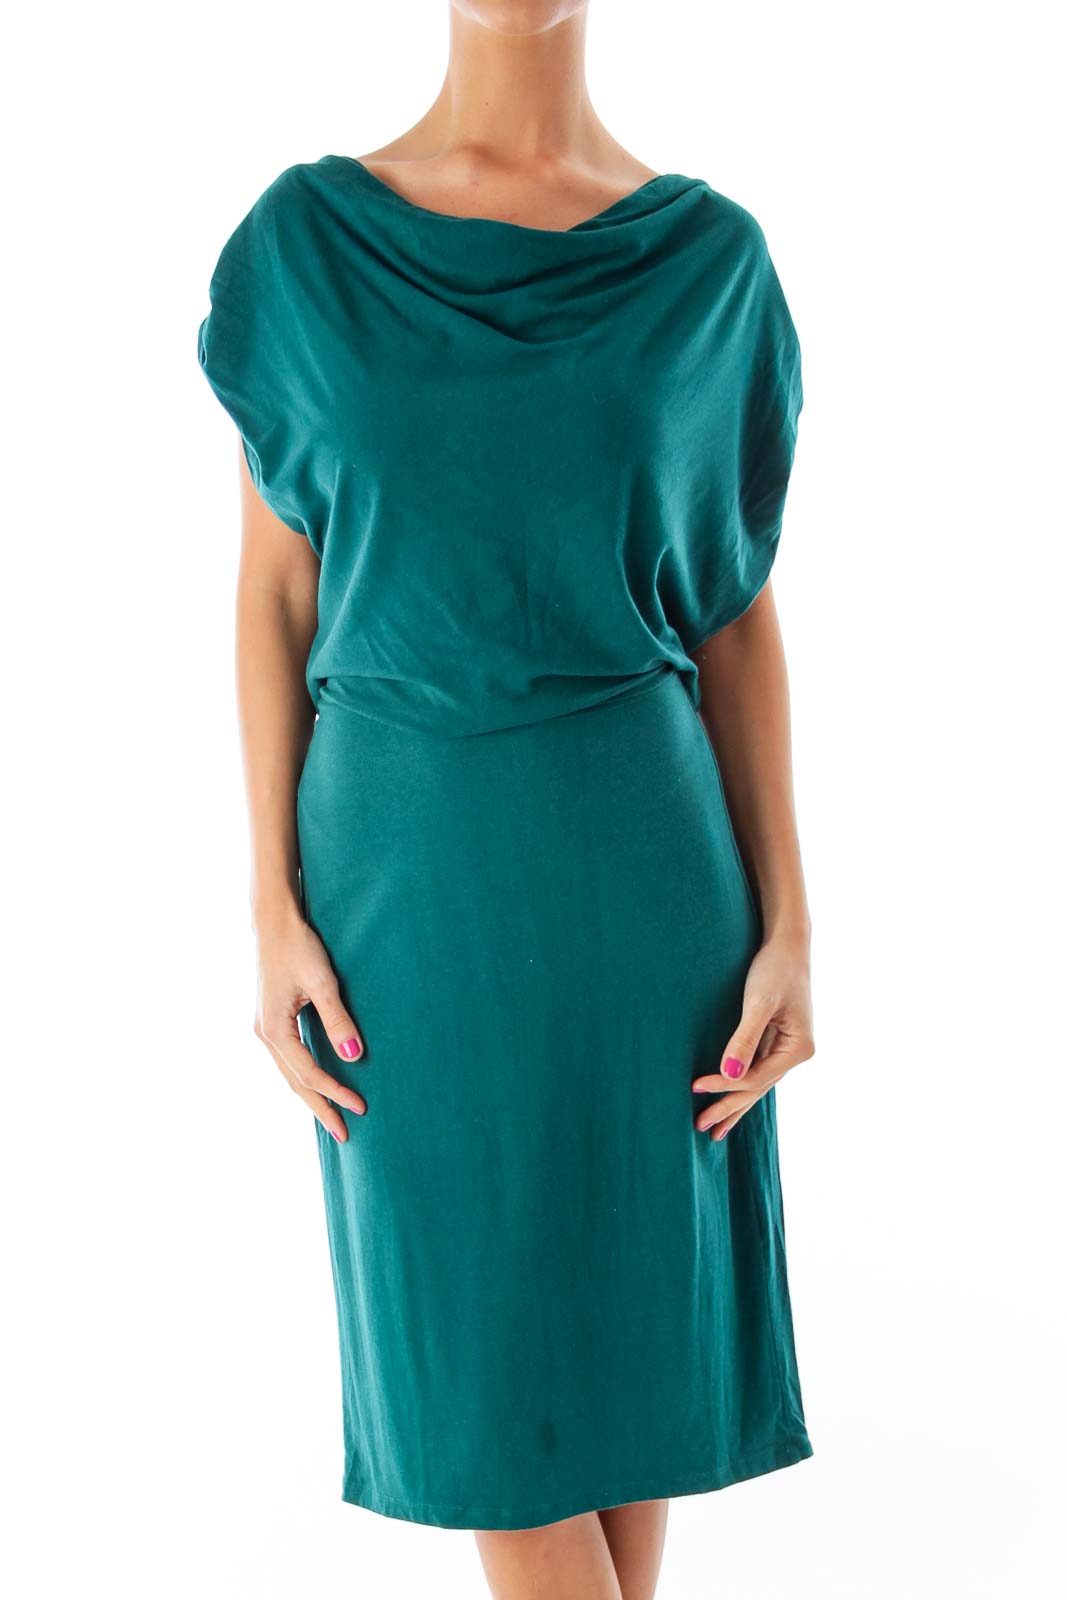 Green Heathered Dress Front